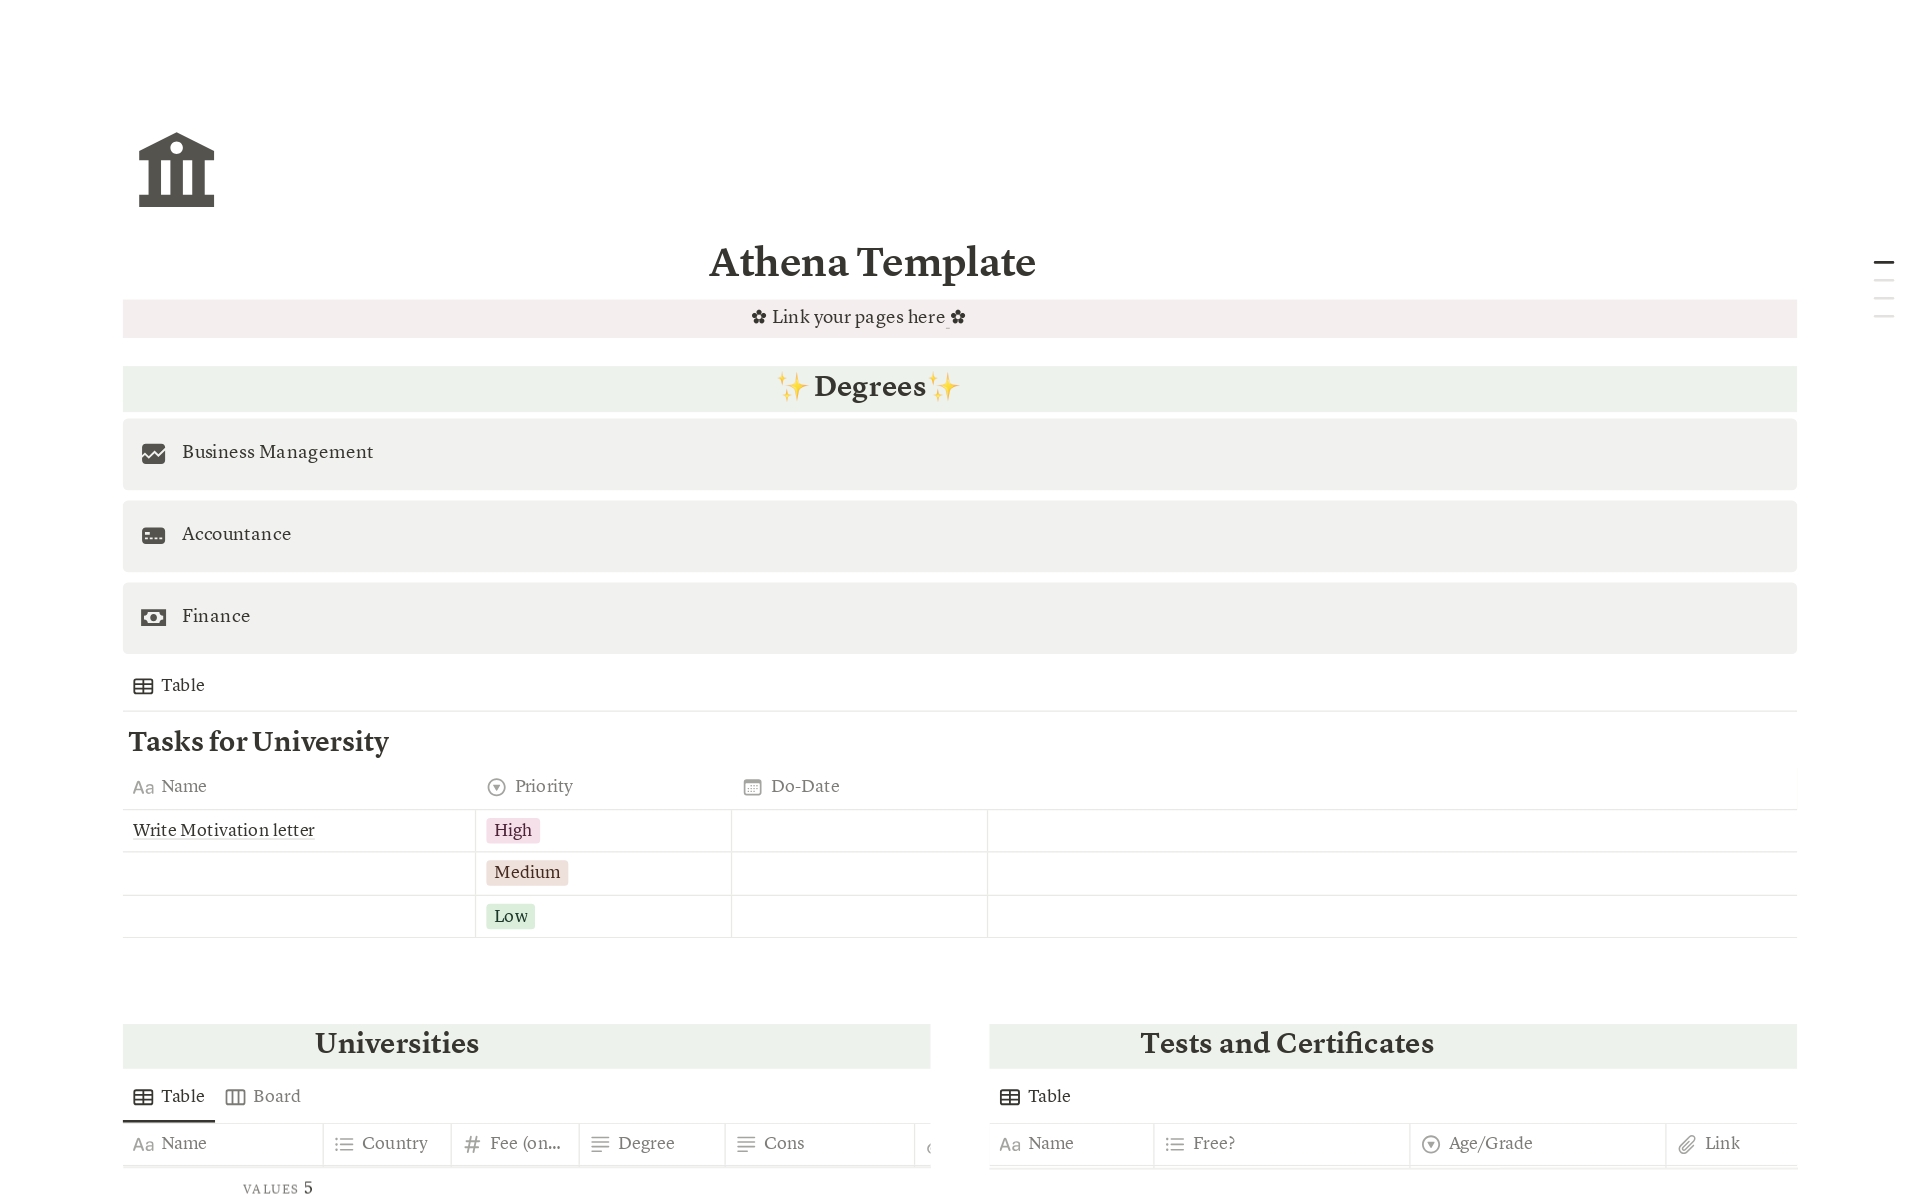 Make a wise choice.

Applying to university can be stressful. This Greek-inspired “Athena” Template is designed to help you organize your academic future so you can concentrate on the quality of your applications.